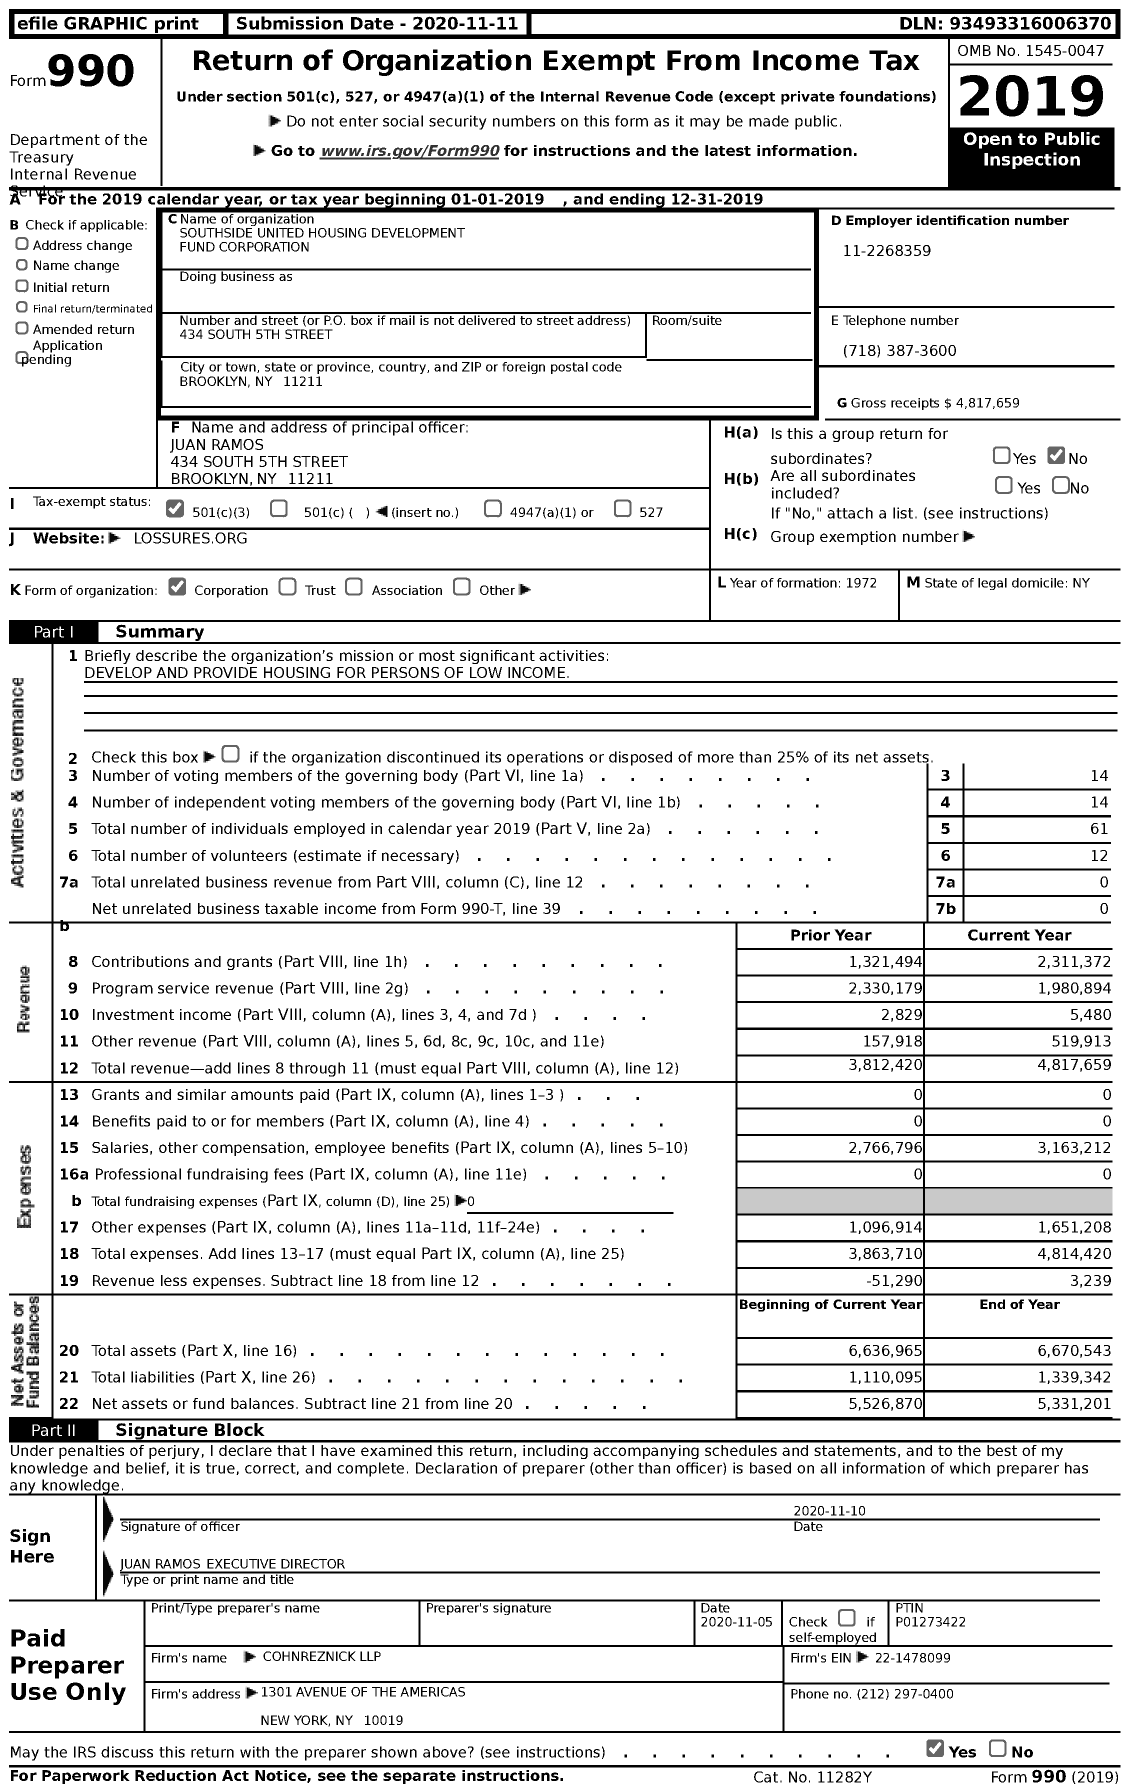 Image of first page of 2019 Form 990 for Southside United Housing Development Fund Corporation